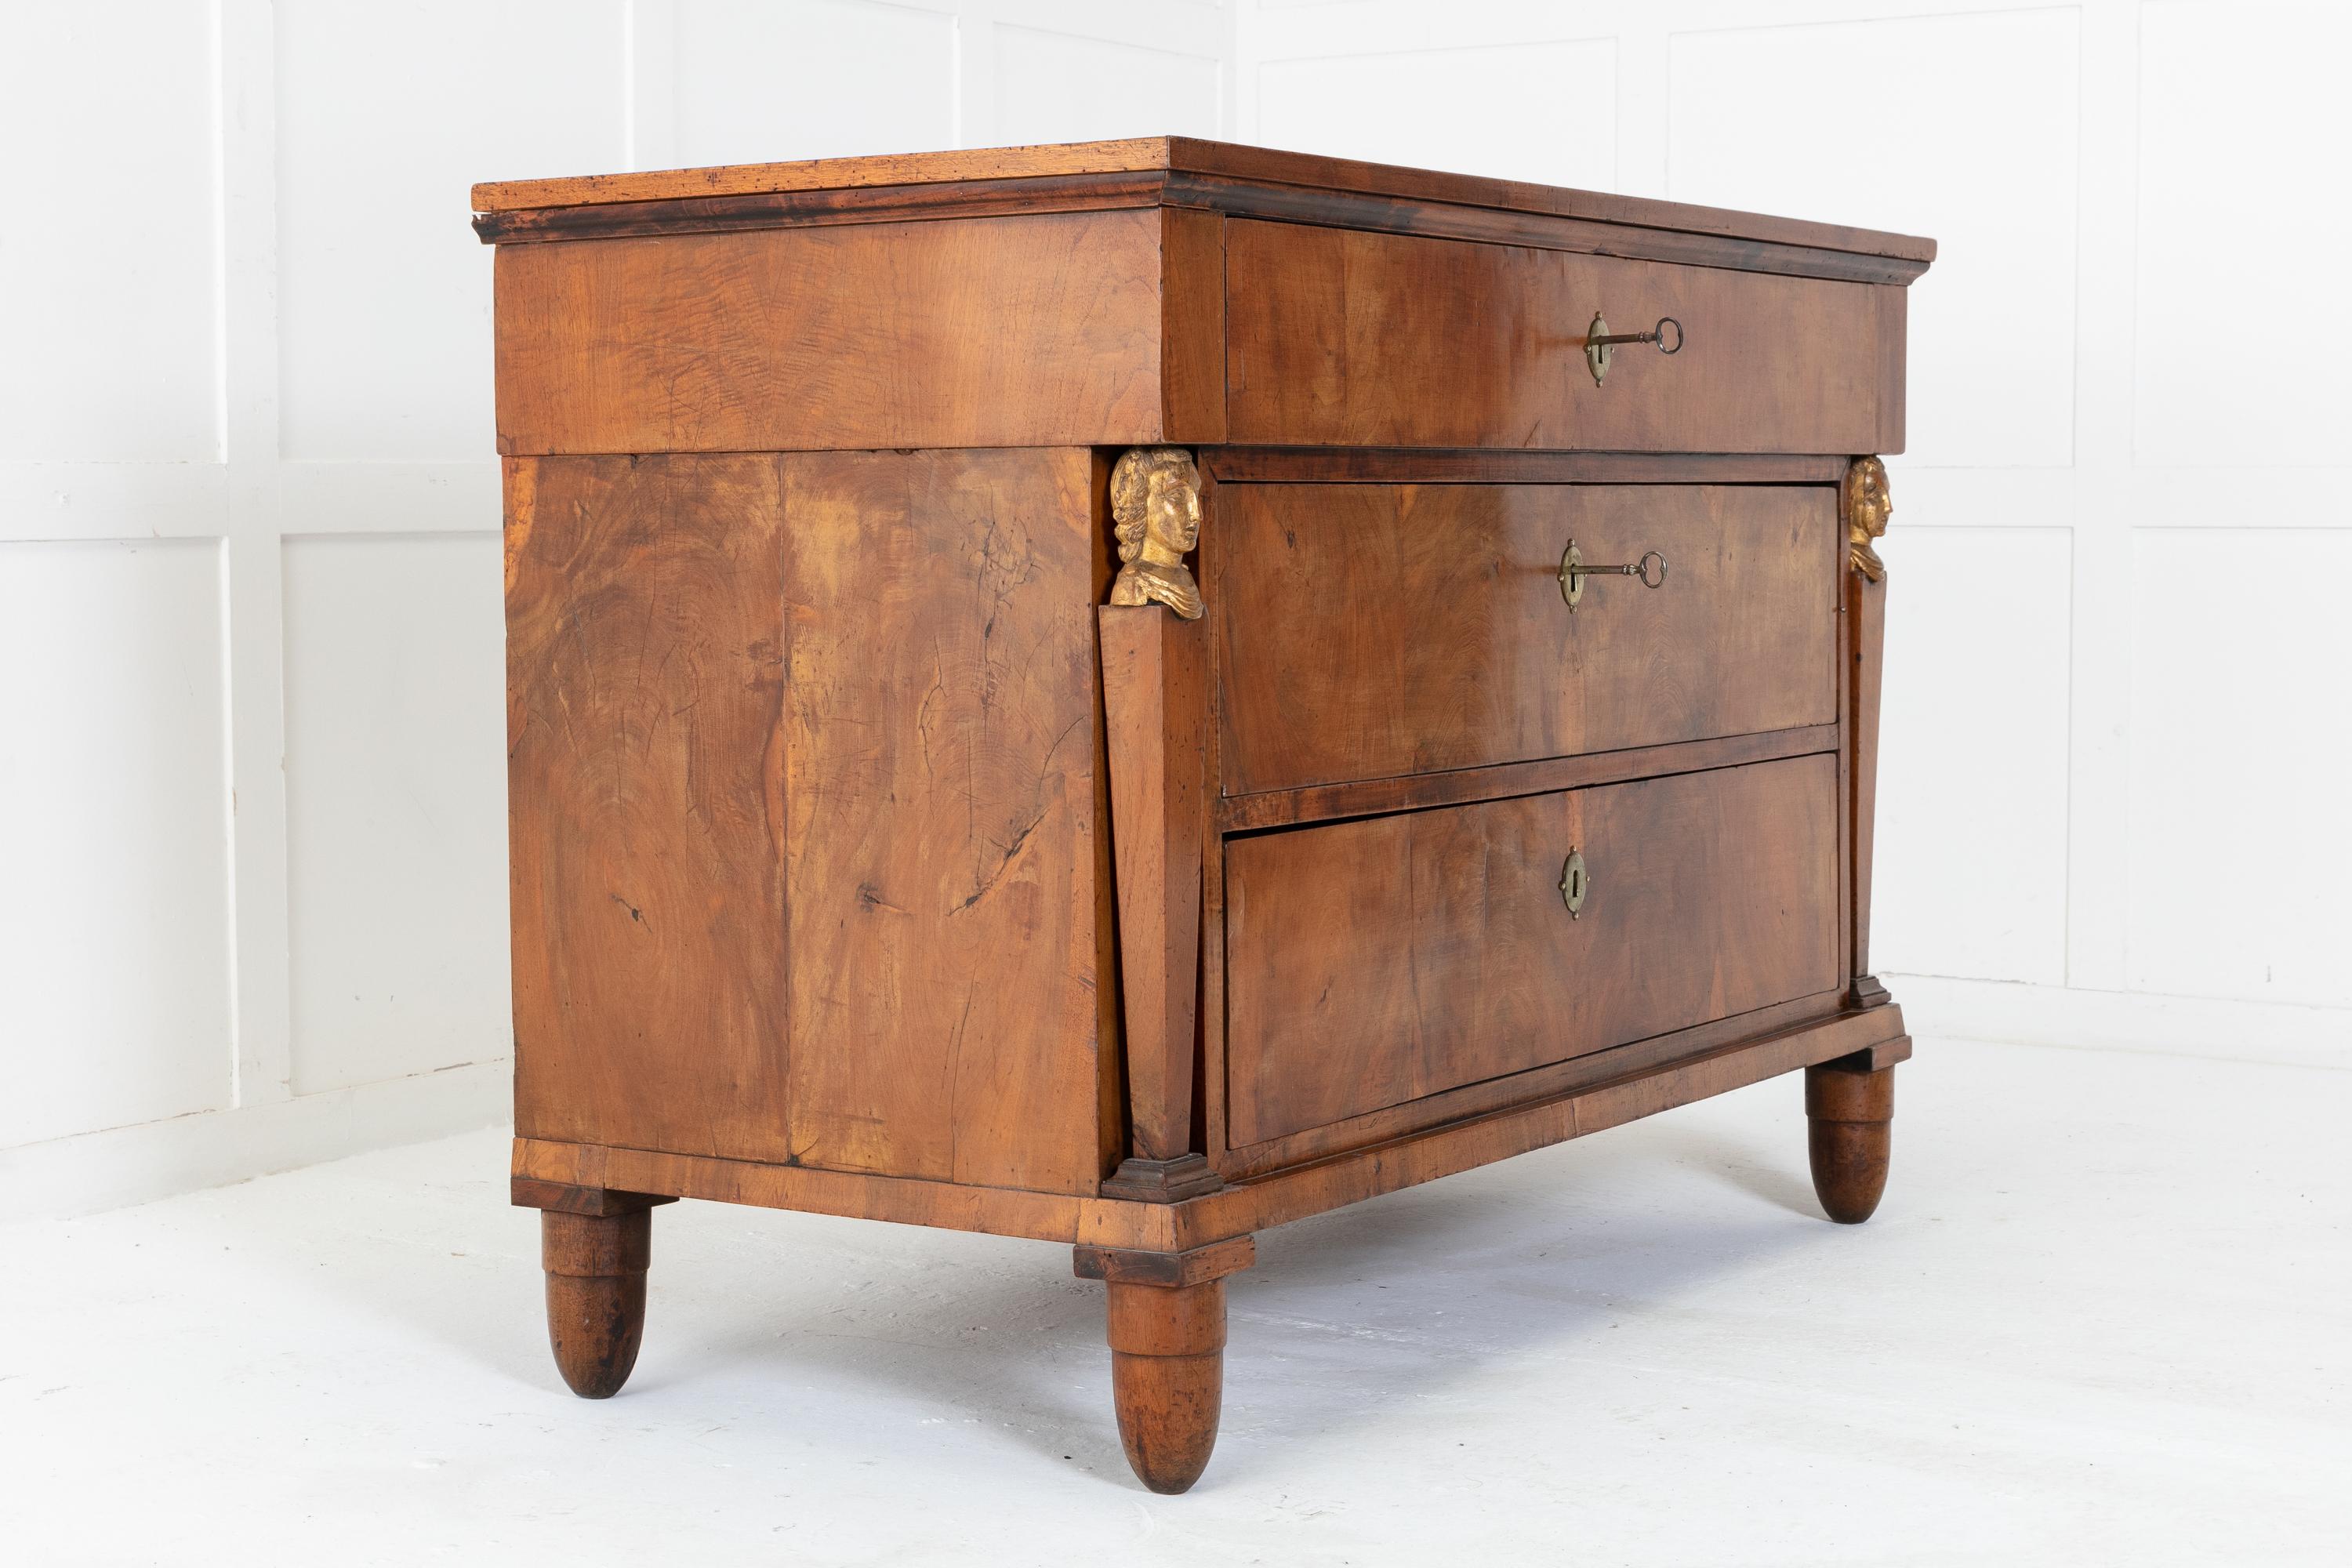 Early 19th century Italian, three drawer, walnut commode. The top sits above a long drawer. A further two graduated drawers below are flanked by square, tapering pillars topped with gilded maiden heads. Each drawer has brass escutcheons with working